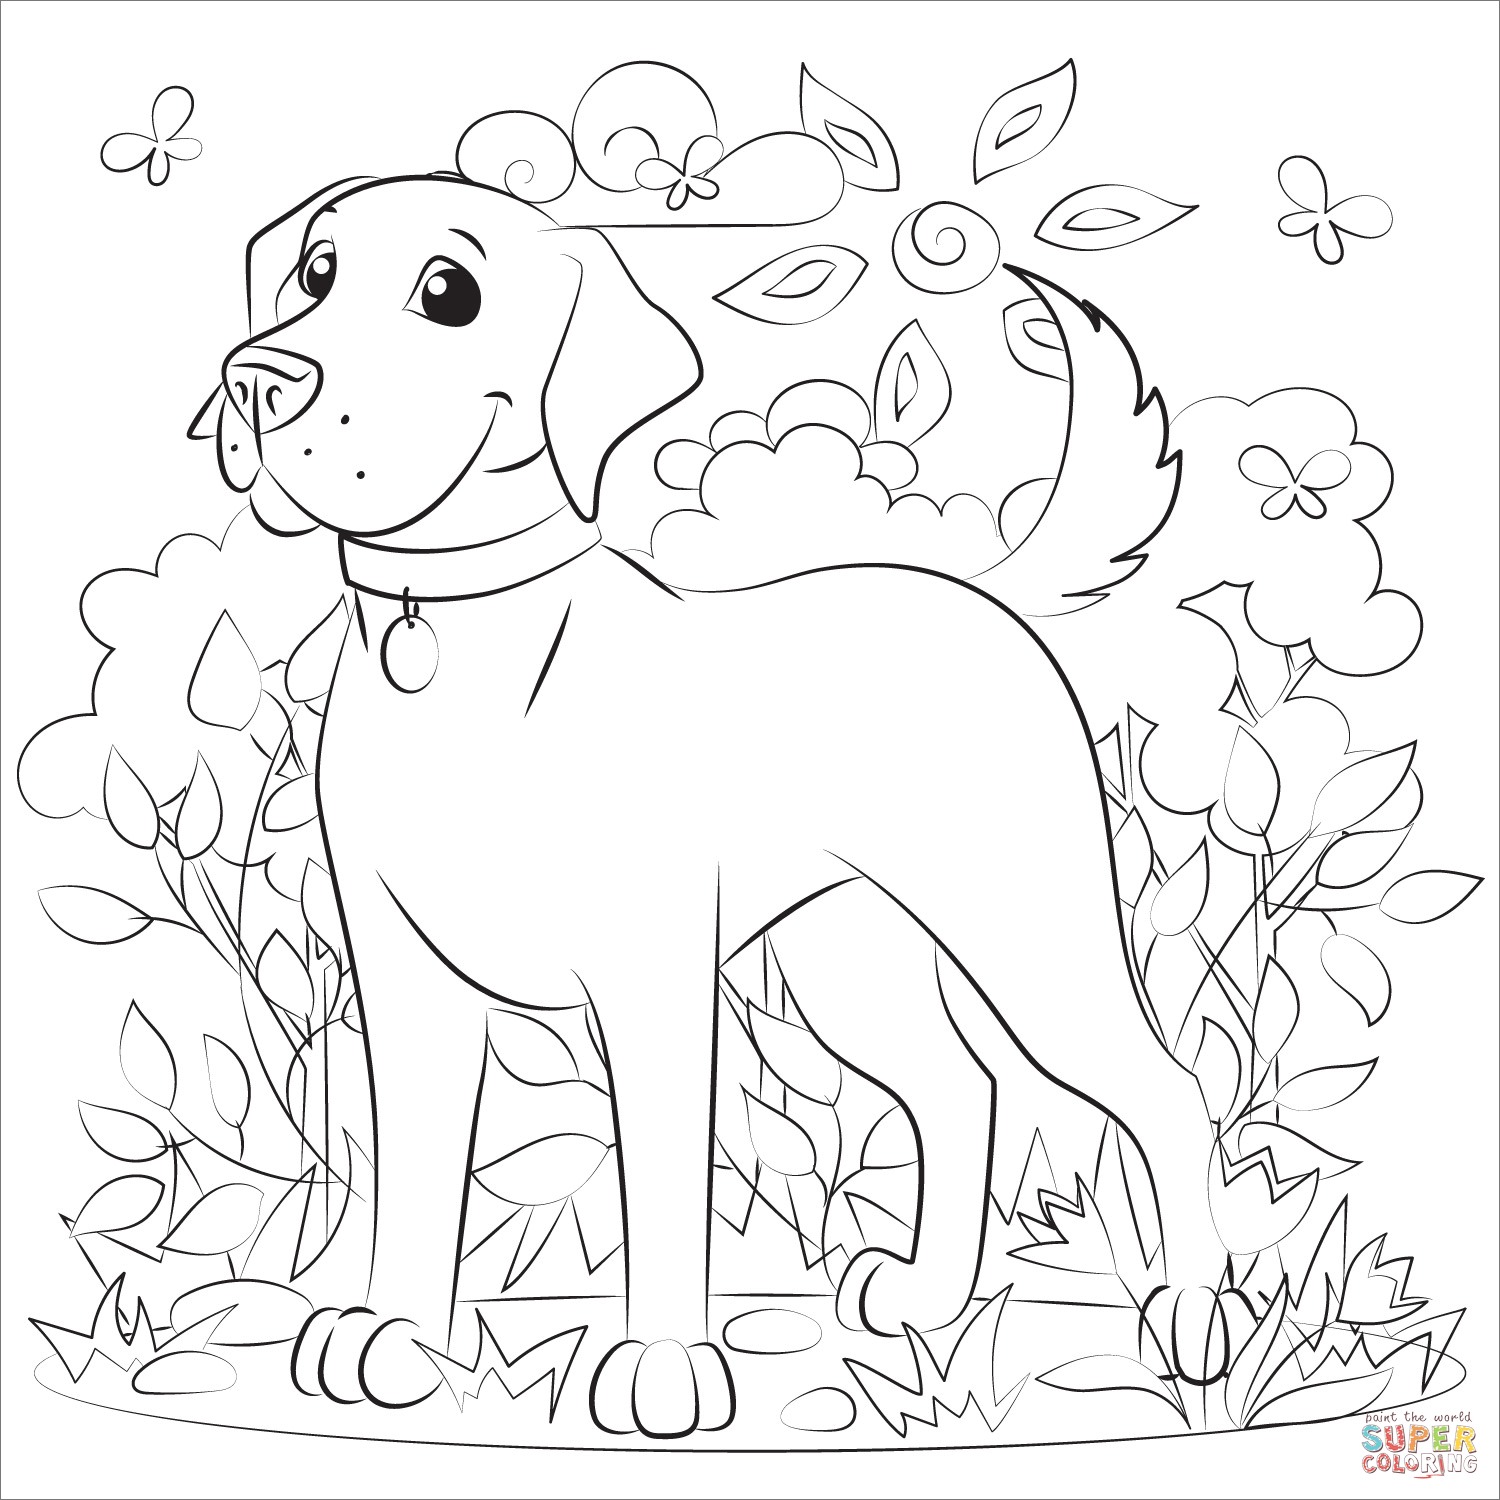 Labrador coloring page free printable coloring pages